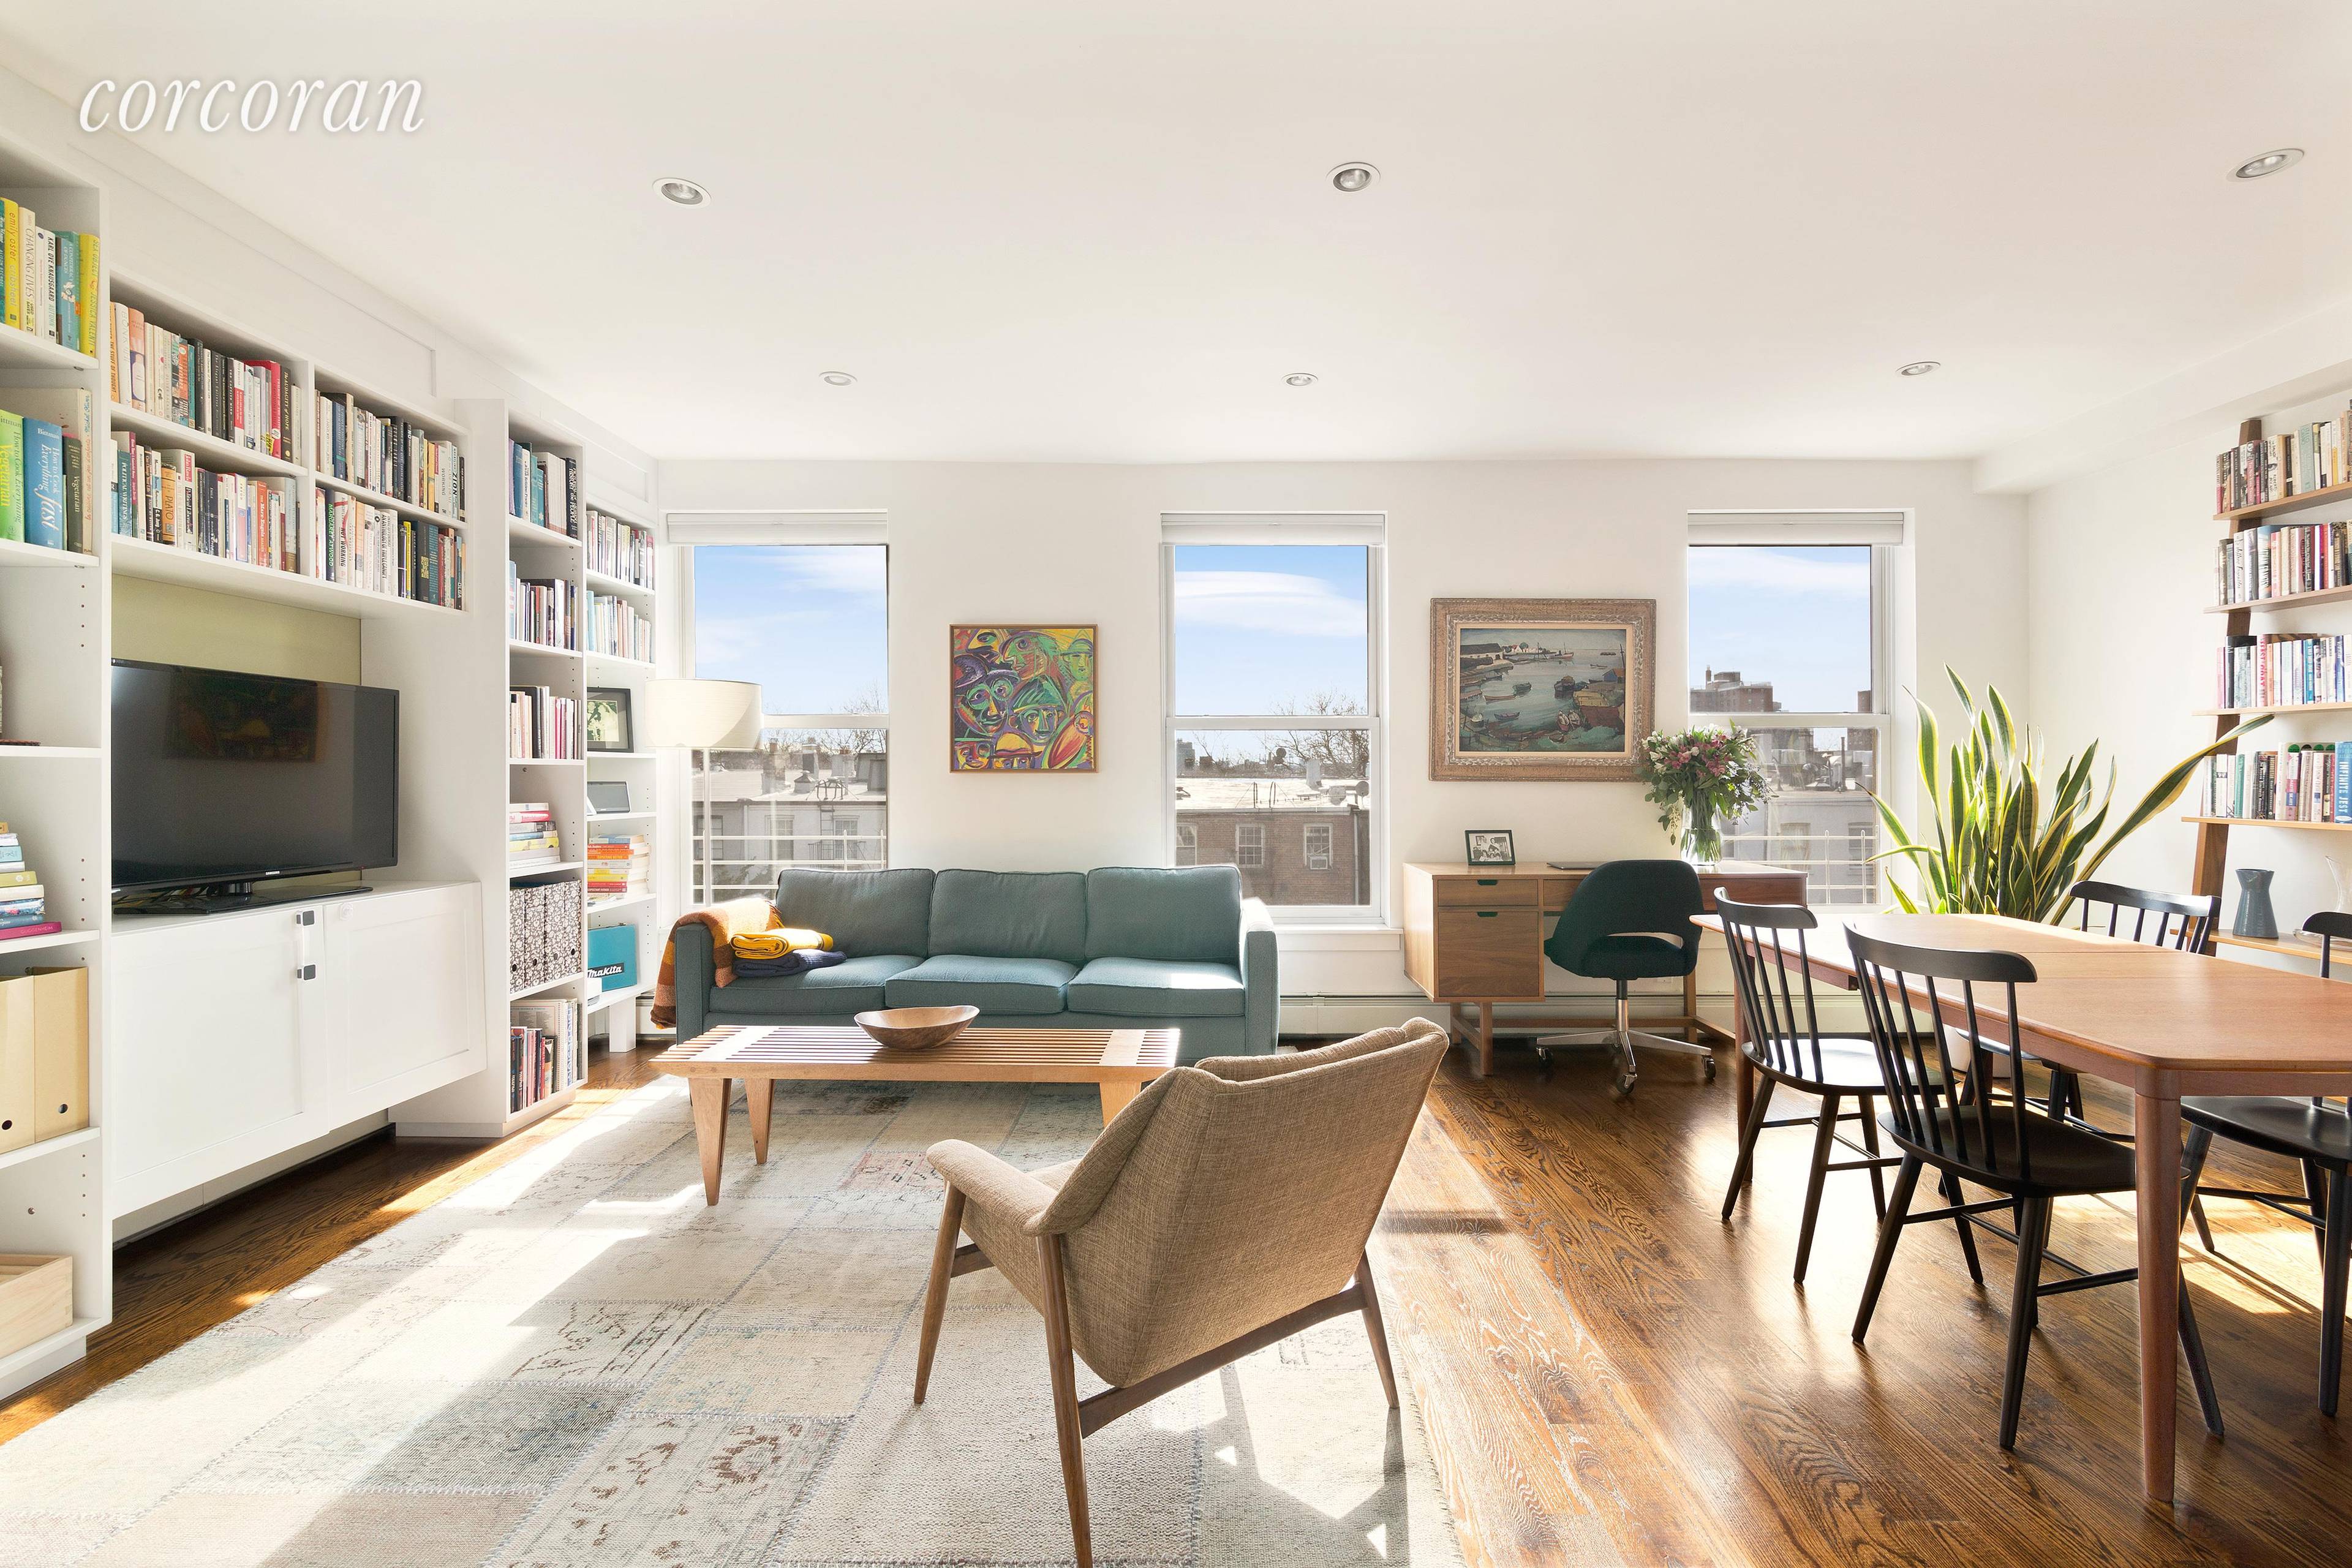 In the heart of Boerum Hill on gorgeous Pacific Street, this immaculate condominium residence with private roof deck offers the dream combination contemporary layout and modern finishes in a historic ...